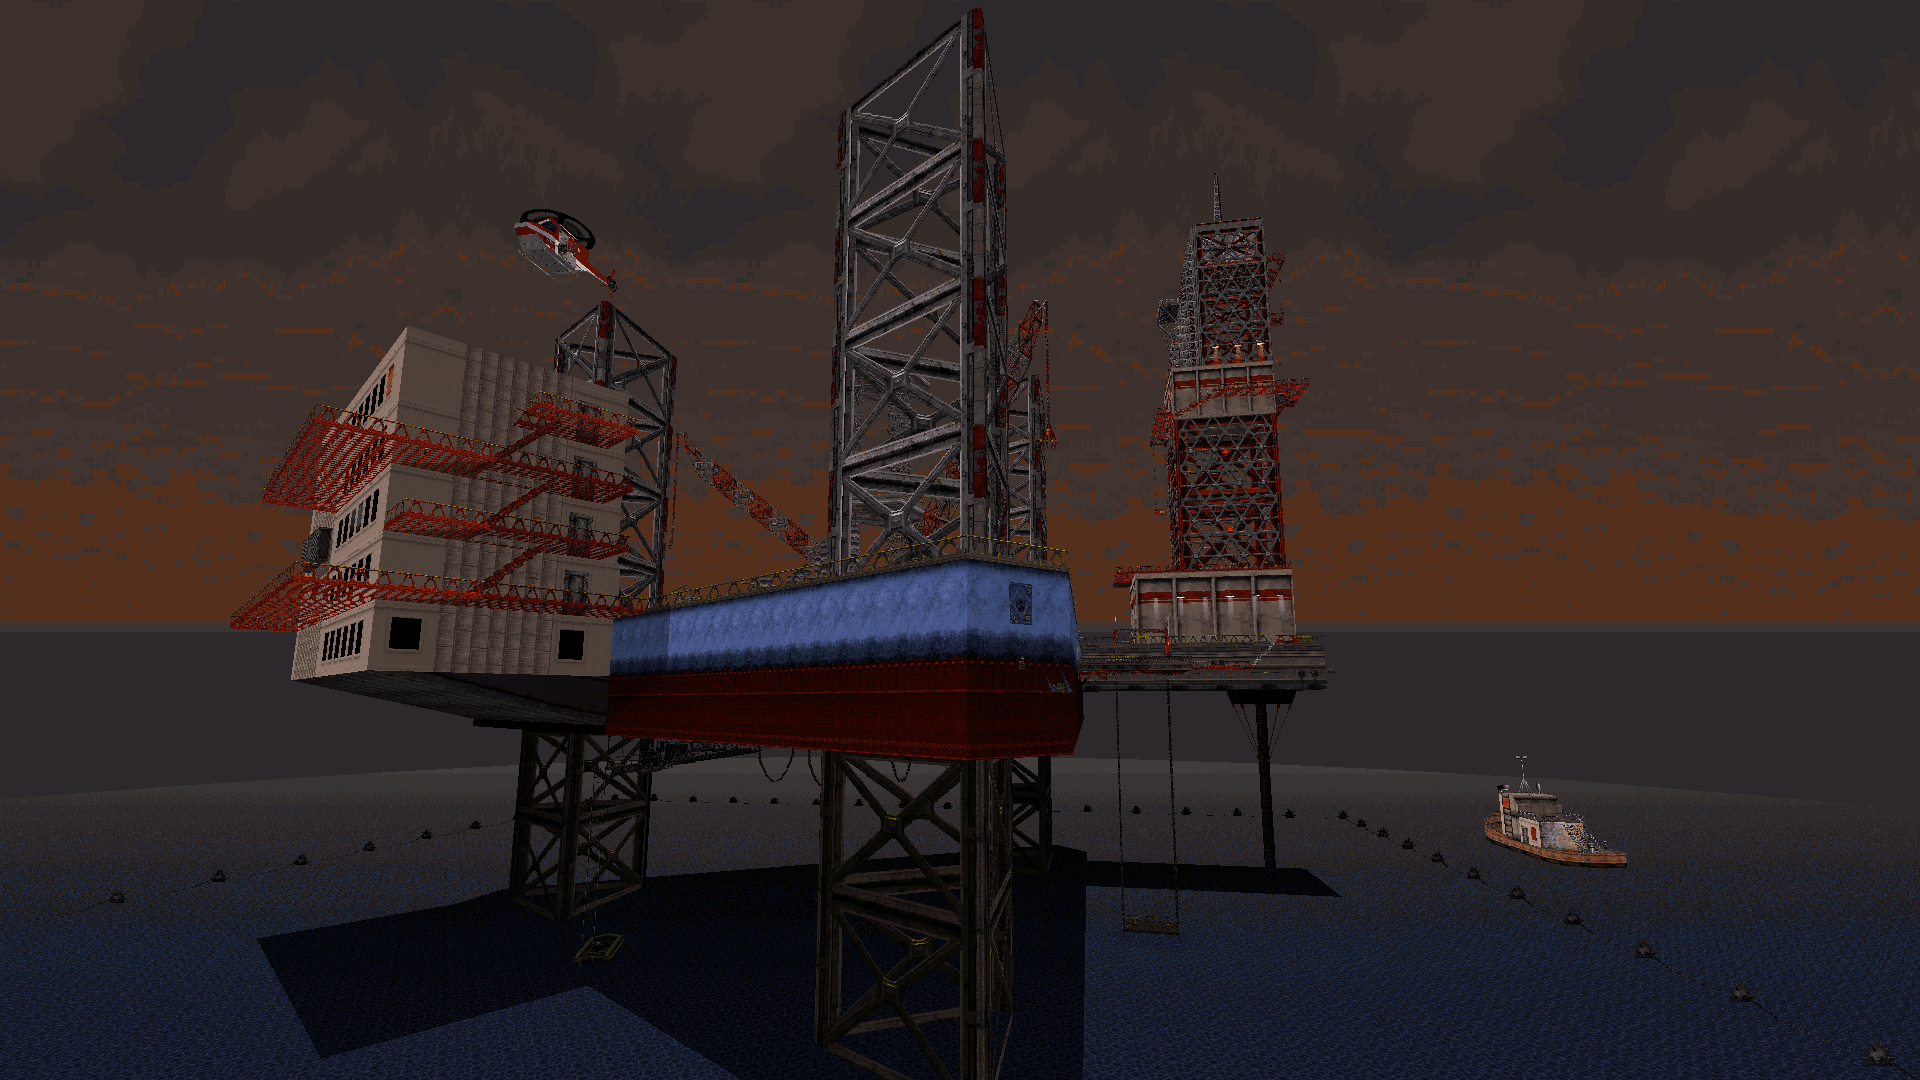 Build recreation of the oil drilling platform in 